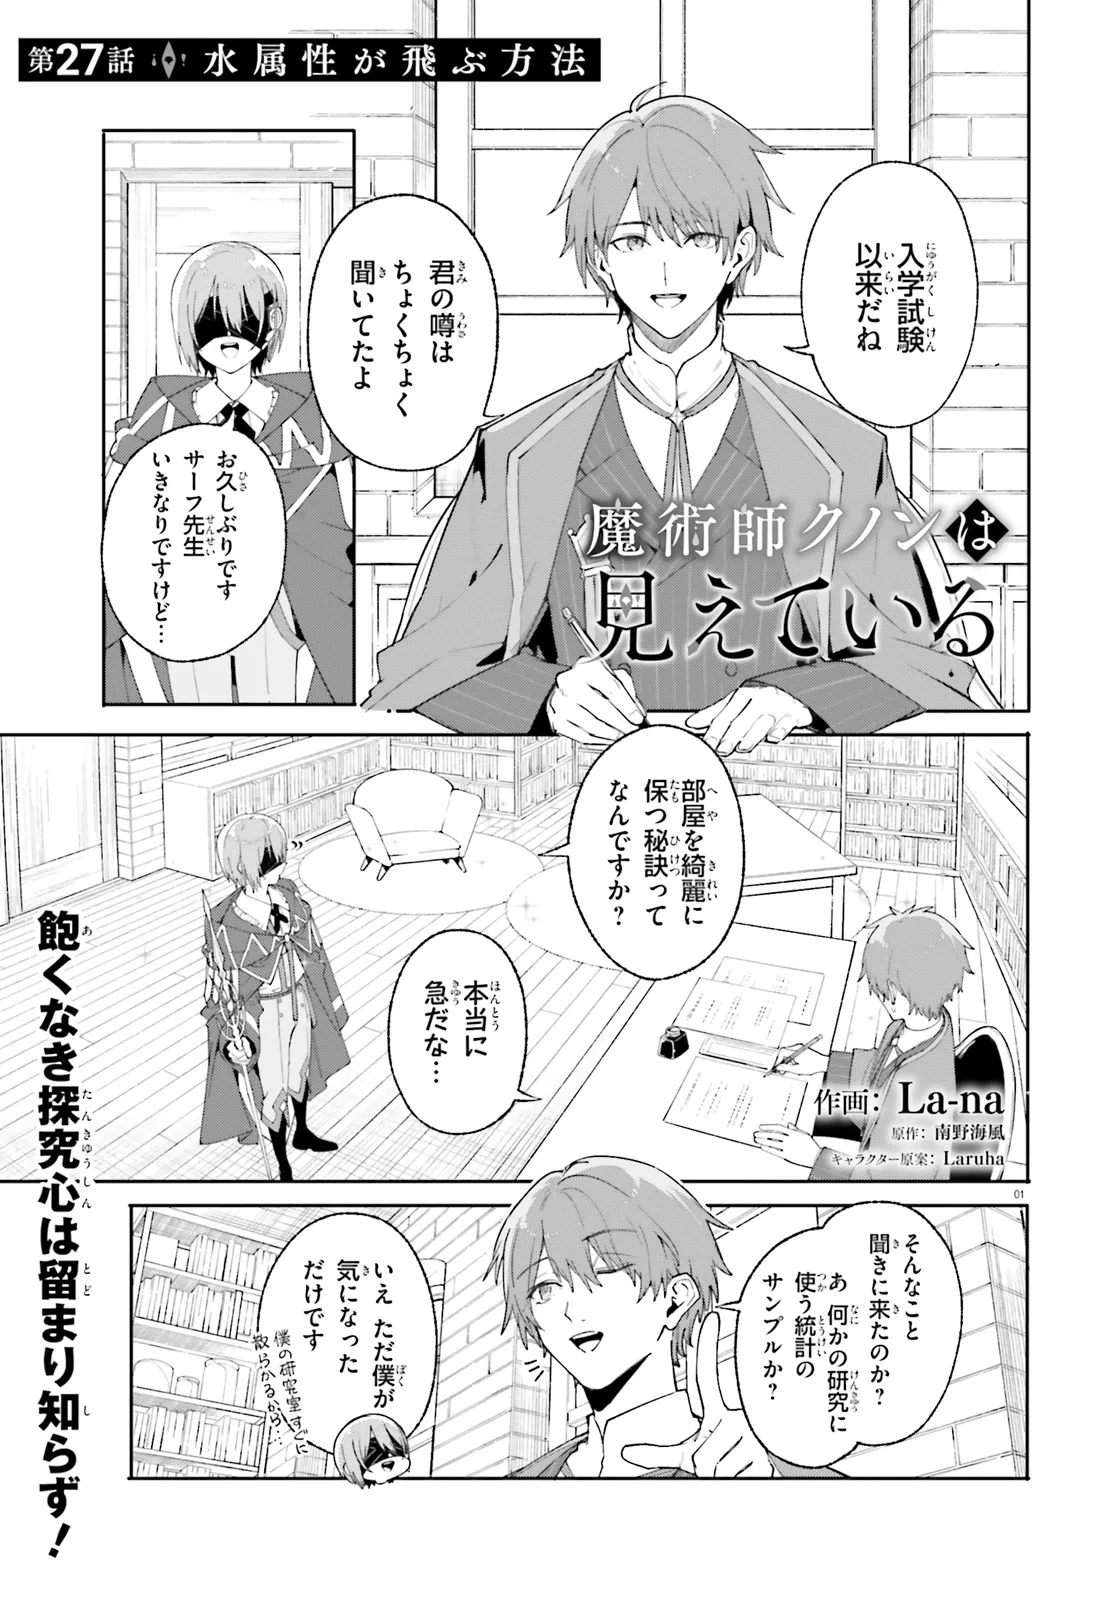 Kunon the Sorcerer Can See Kunon the Sorcerer Can See Through 魔術師クノンは見えている 第27.1話 - Page 1